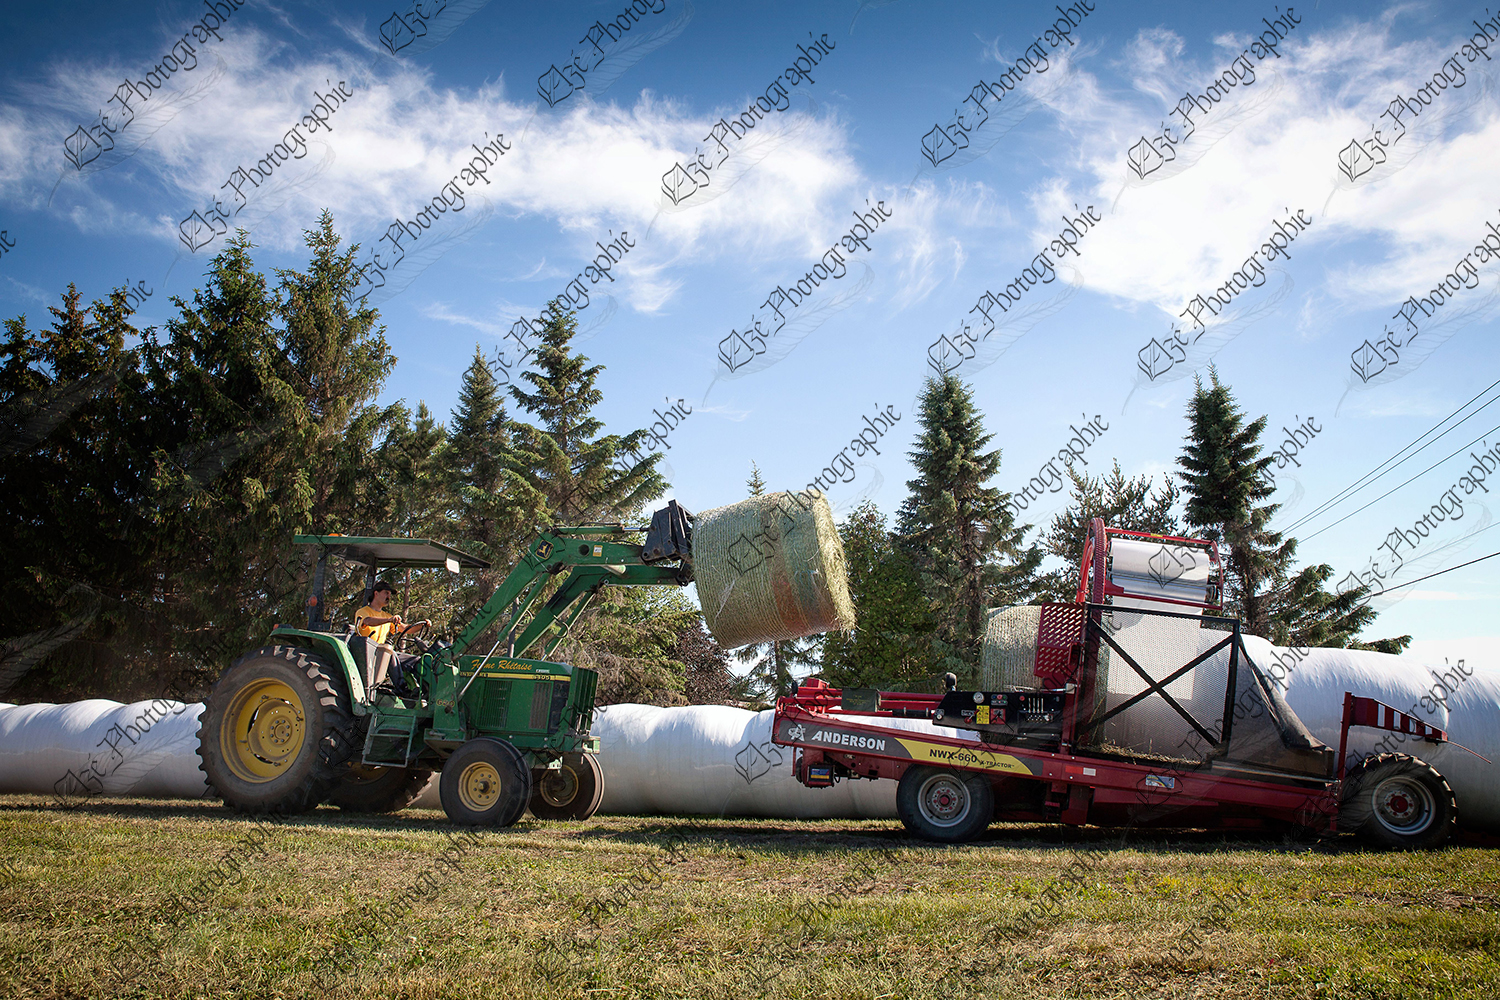 elze_photo_9384_machinerie_agricole_nuages_coating_machinery_anderson